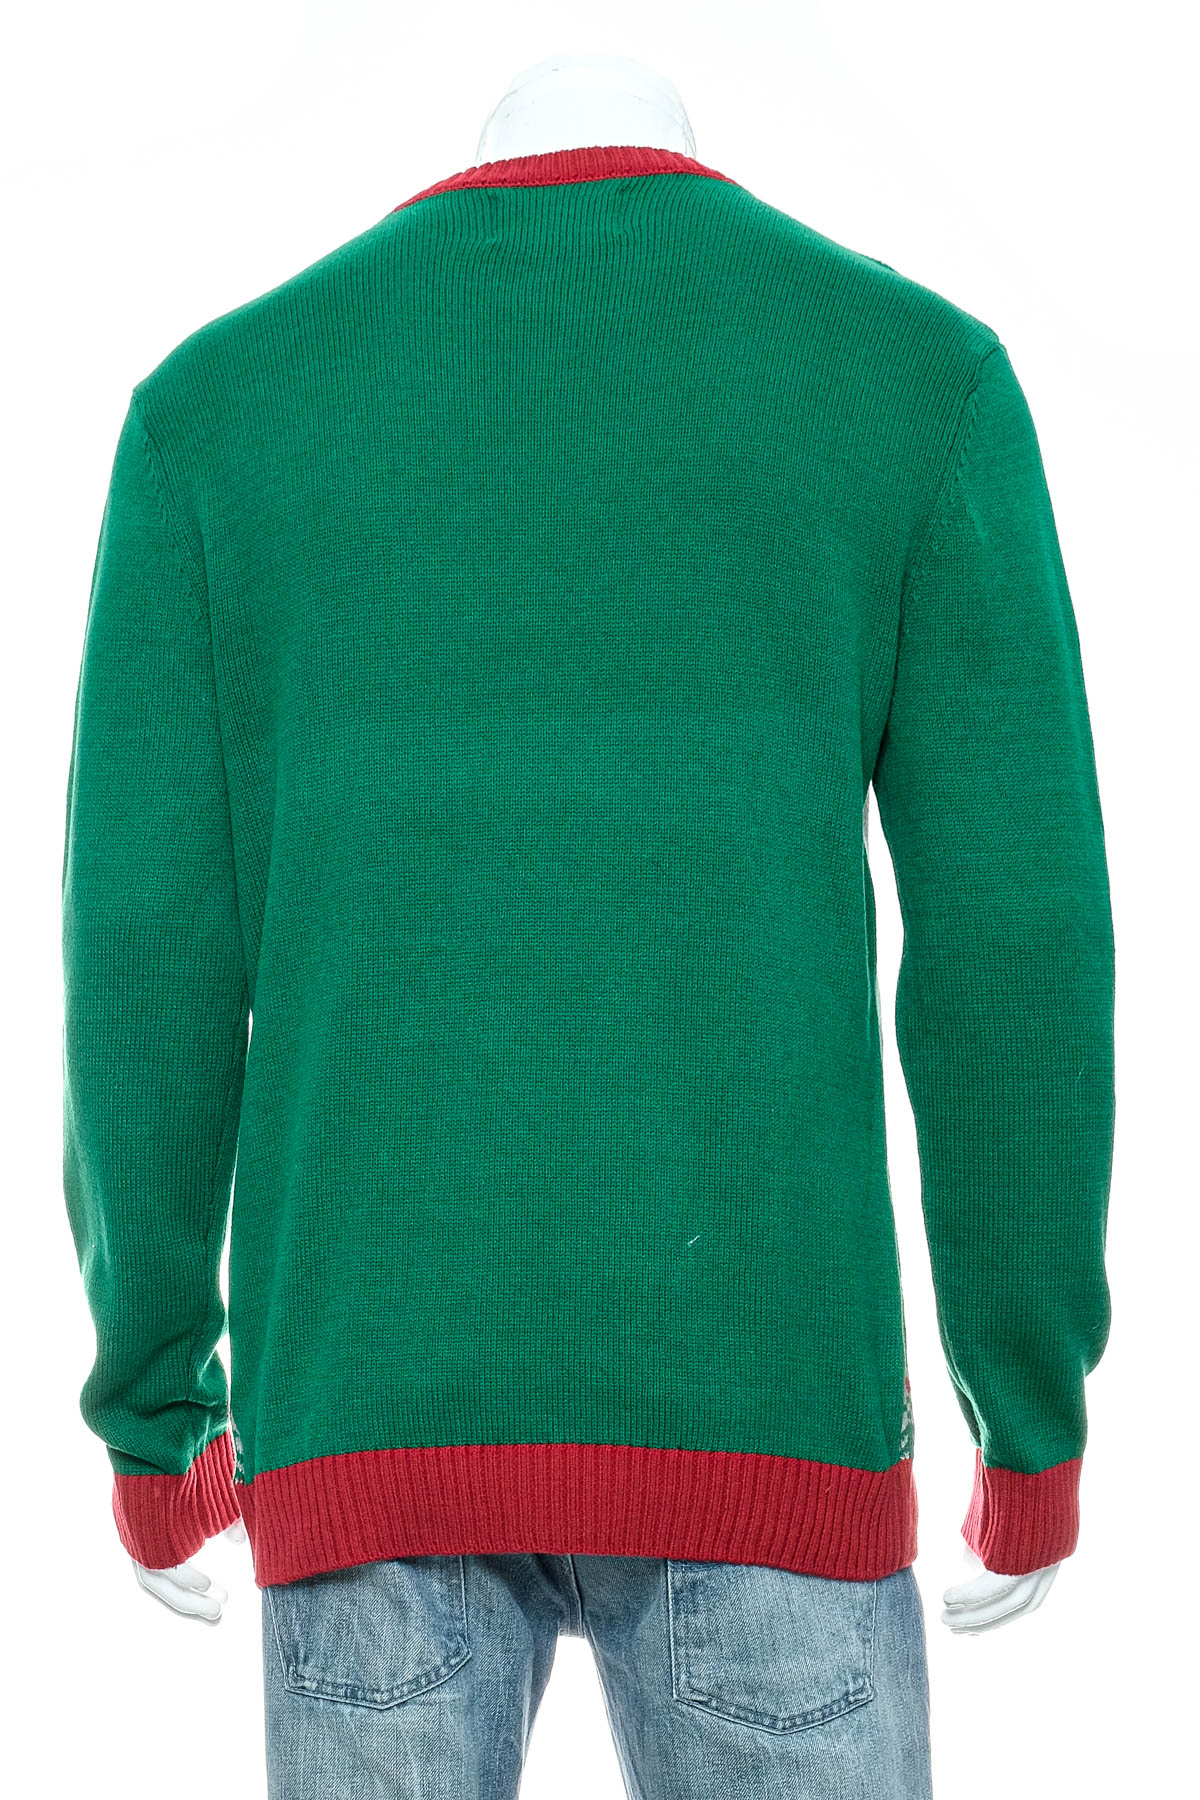 Men's sweater - Ugly - 1